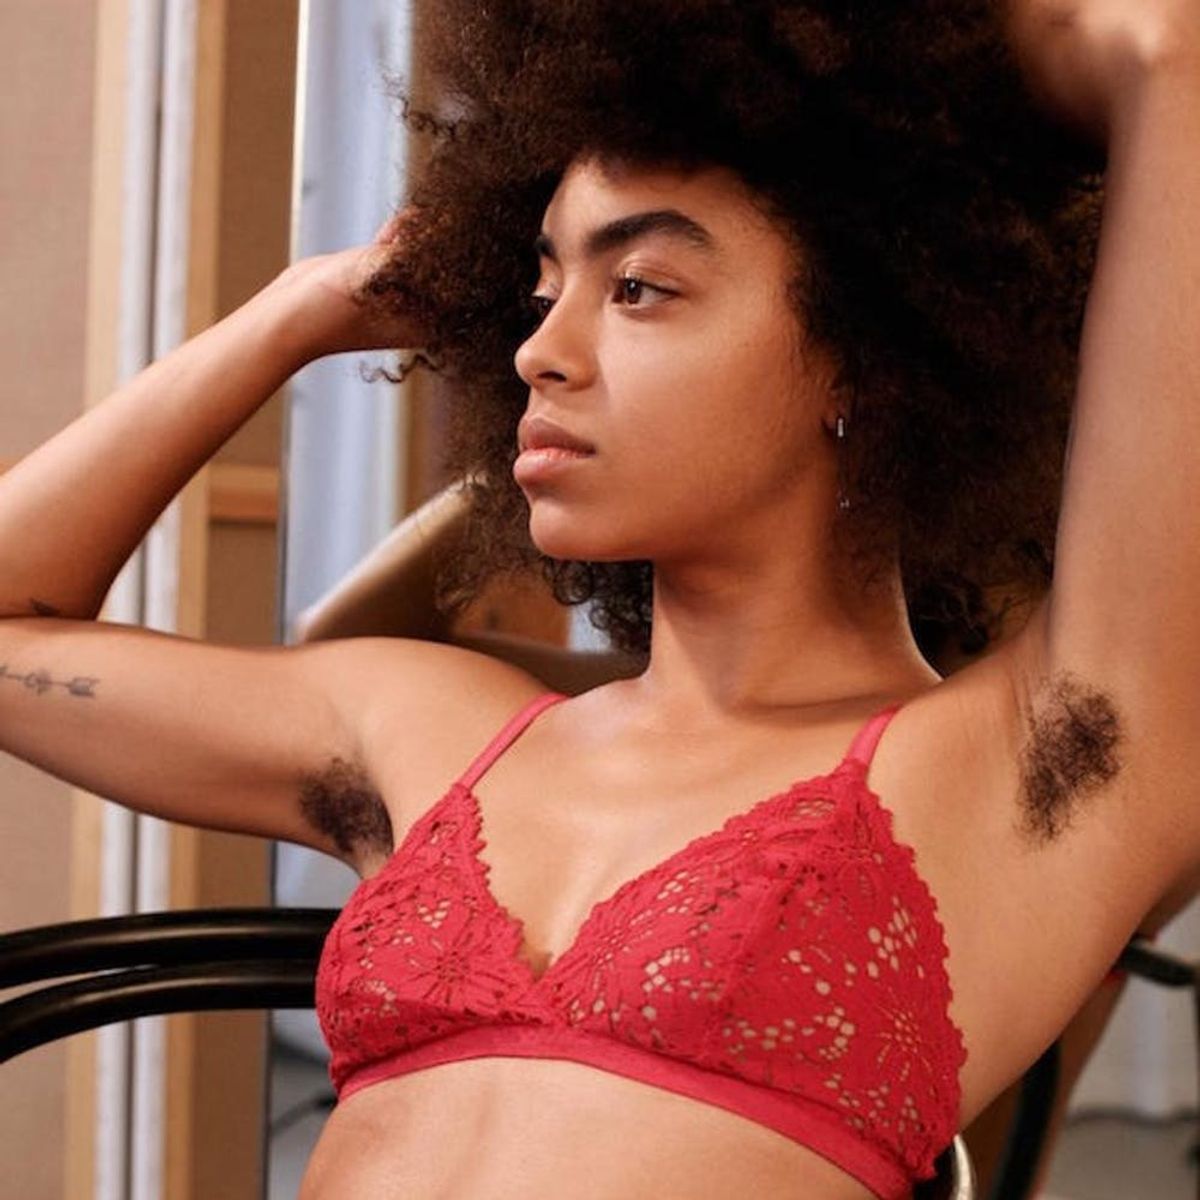 6 Body-Positive Lingerie Companies You’ll LOVE